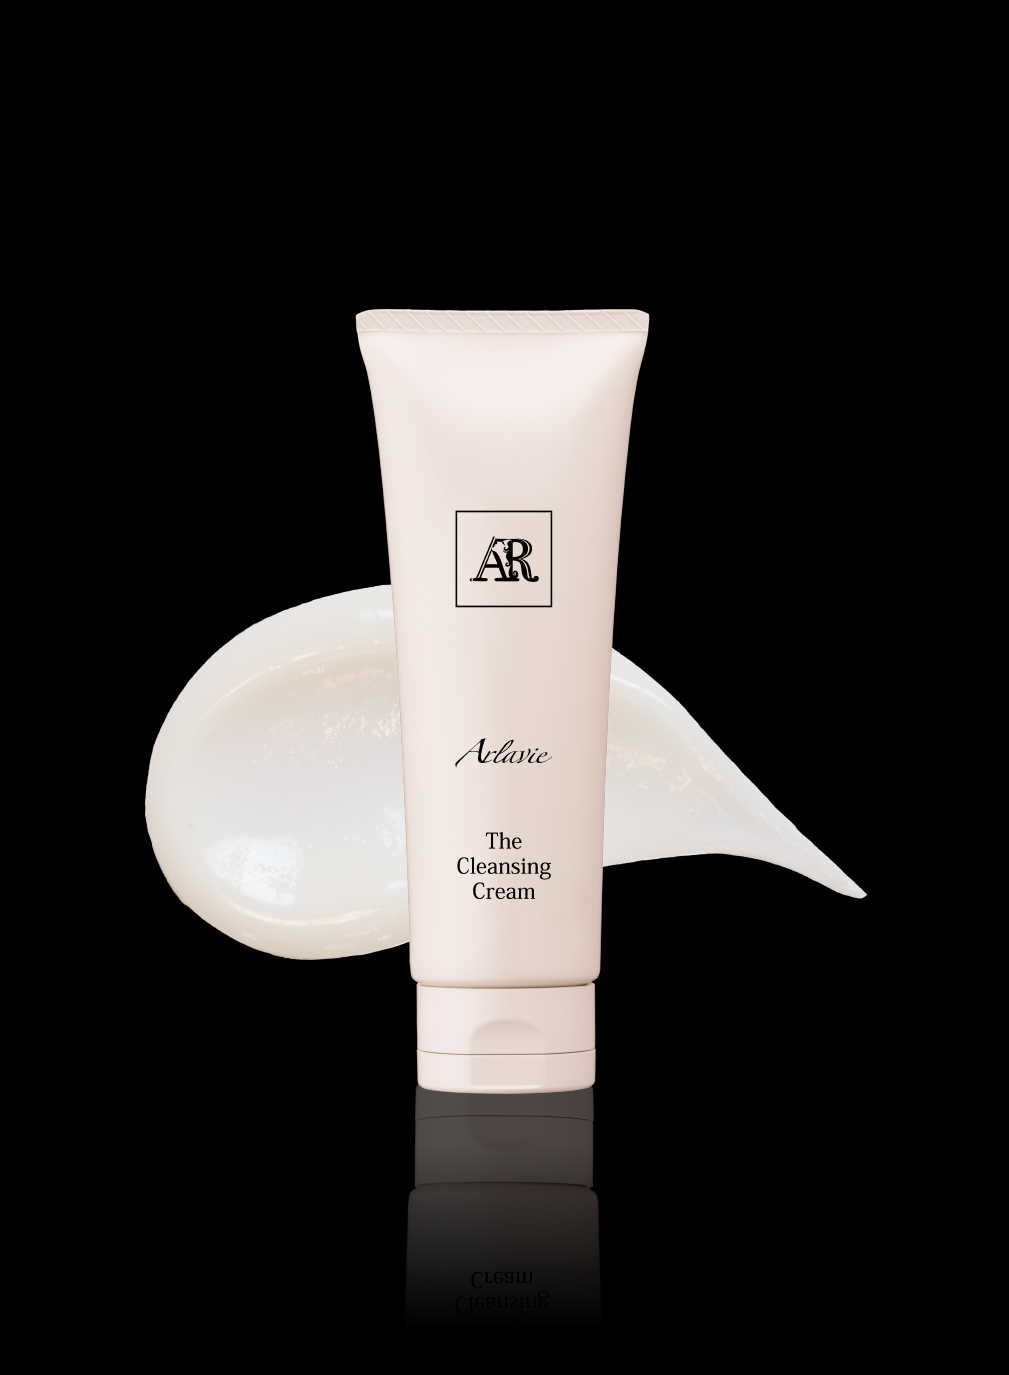 The Cleansing Cream